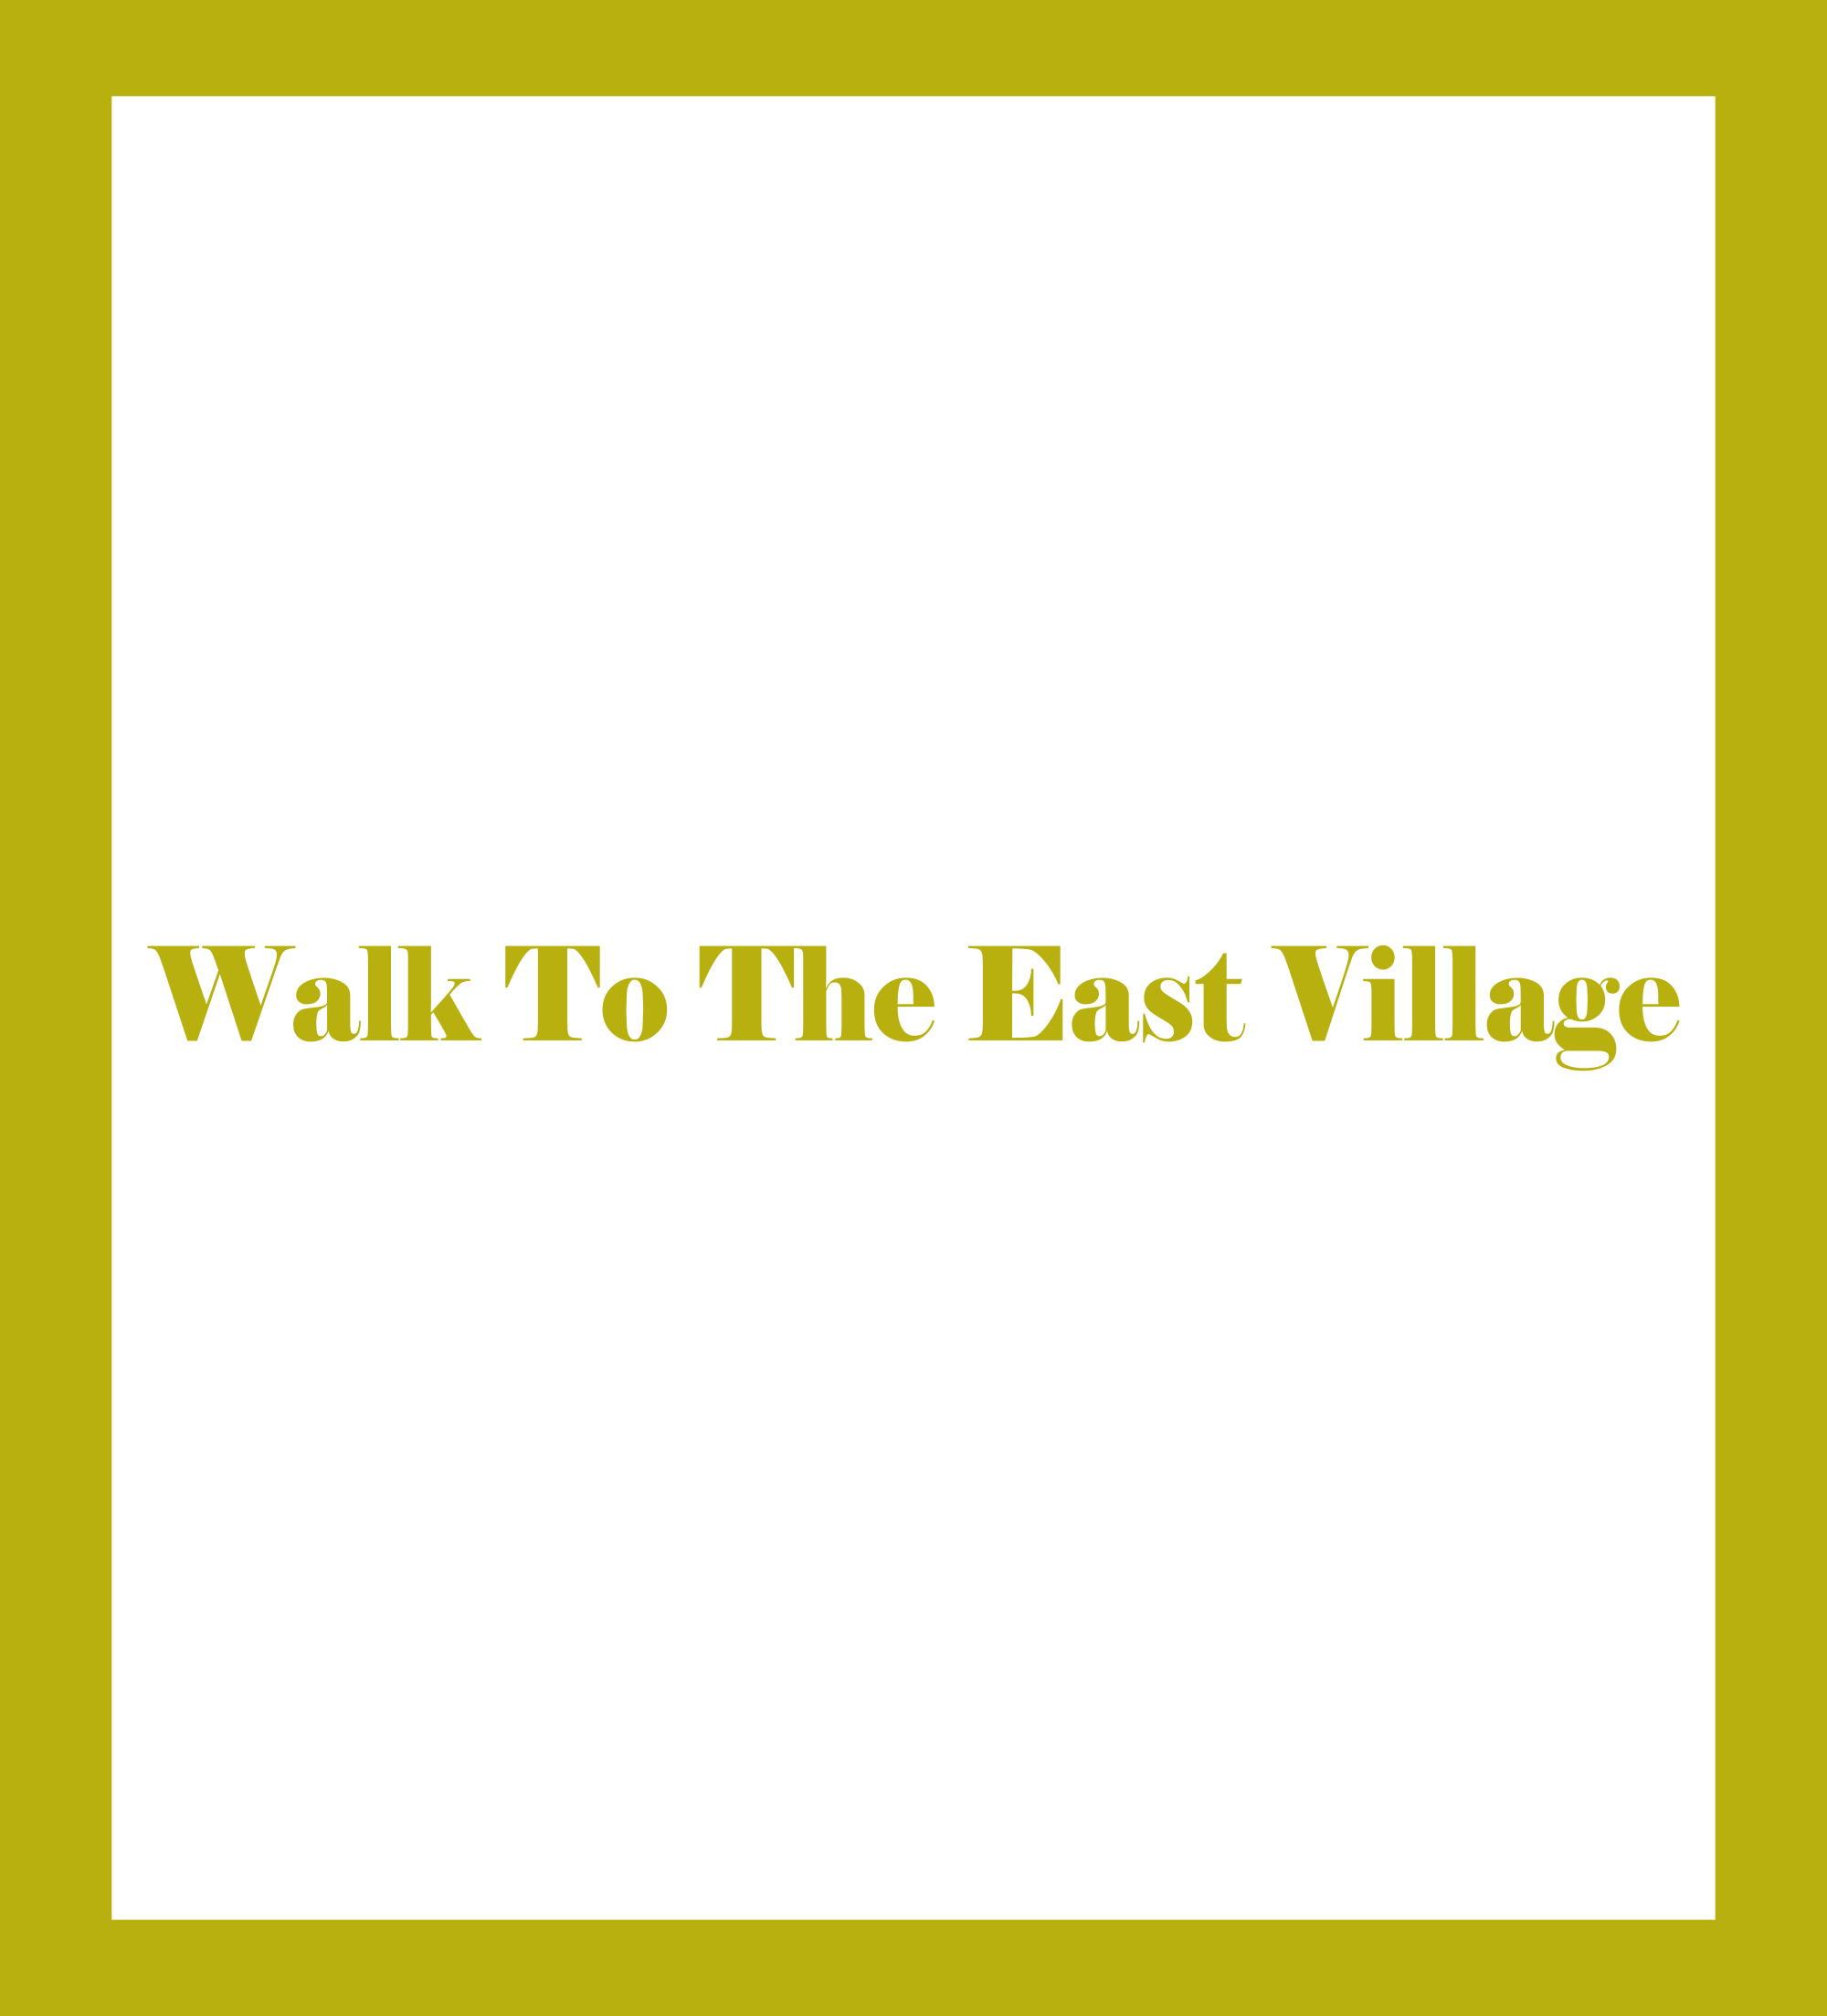 Walk To The East Village